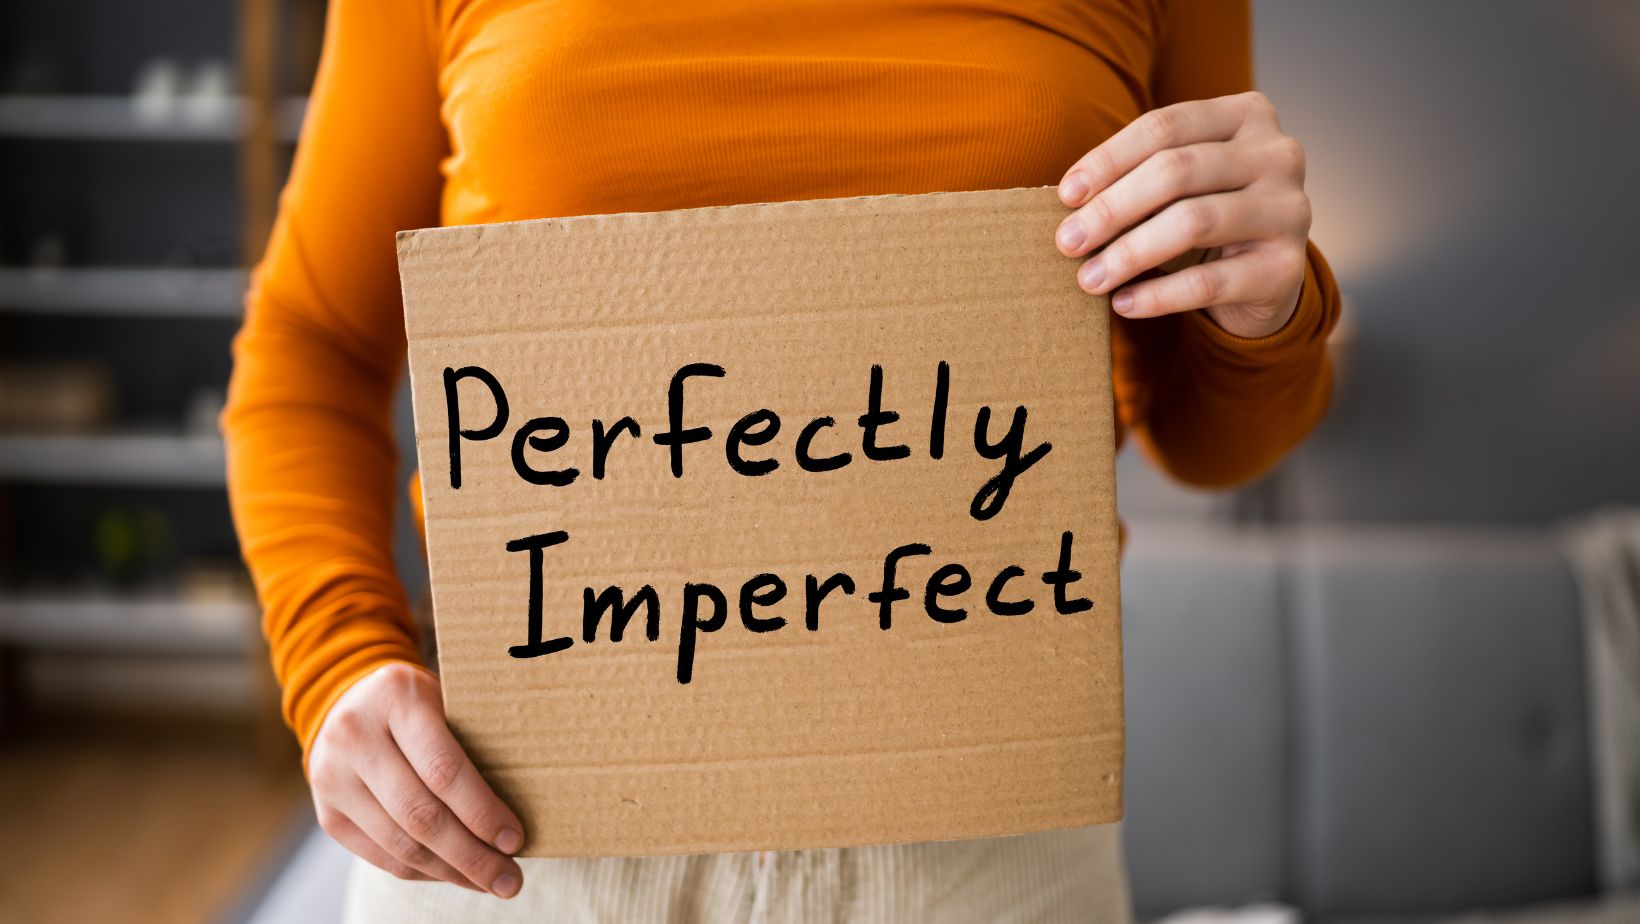 beauty through imperfection encouragement for parenting marriage and family life